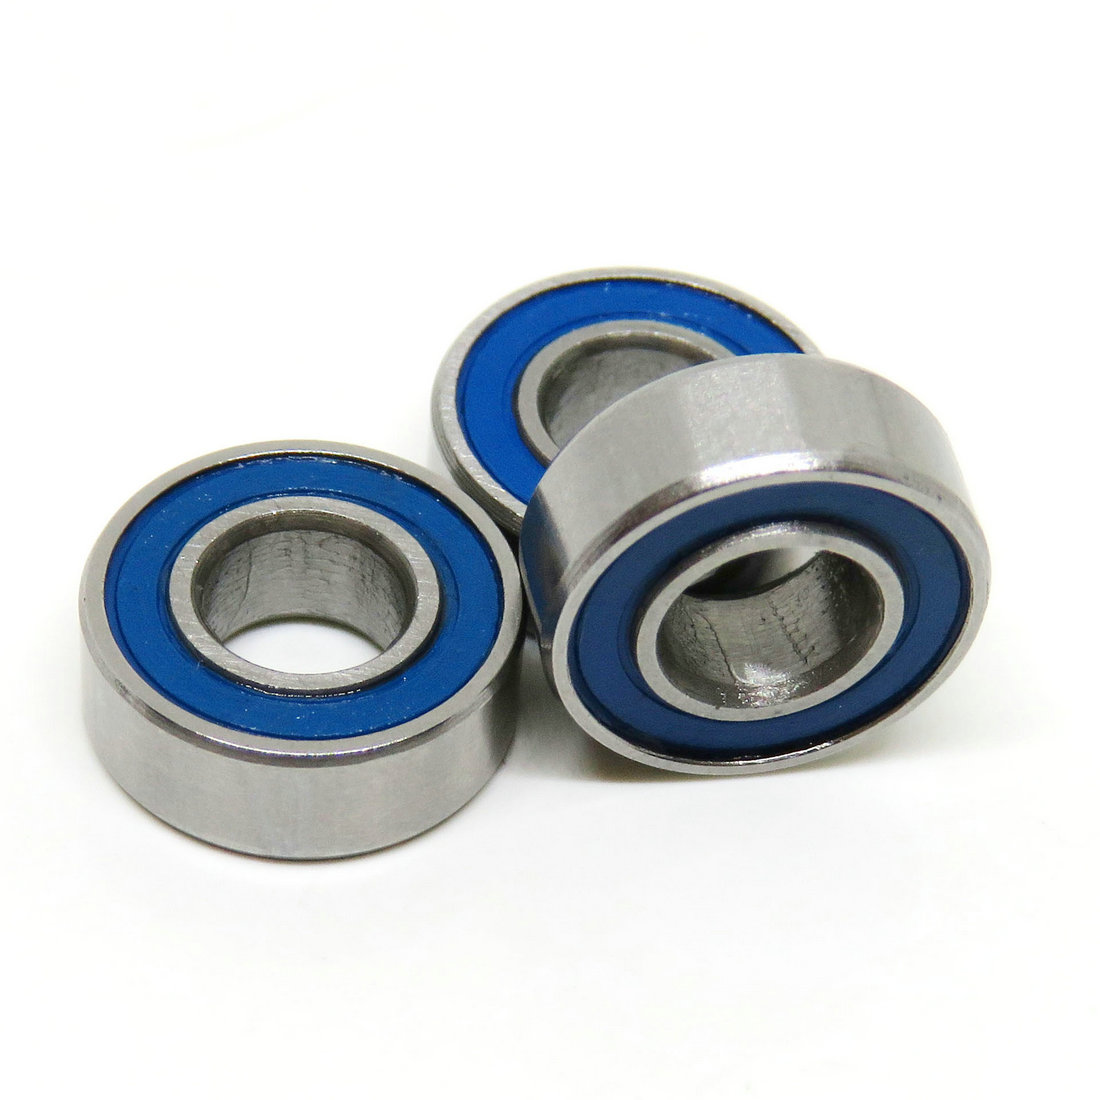 MR128RS Bearing ABEC-3 8x12x3.5 mm Miniature MR128-2RS Ball Bearings RS MR128 2RS With Blue Sealed L-1280DD.jpg